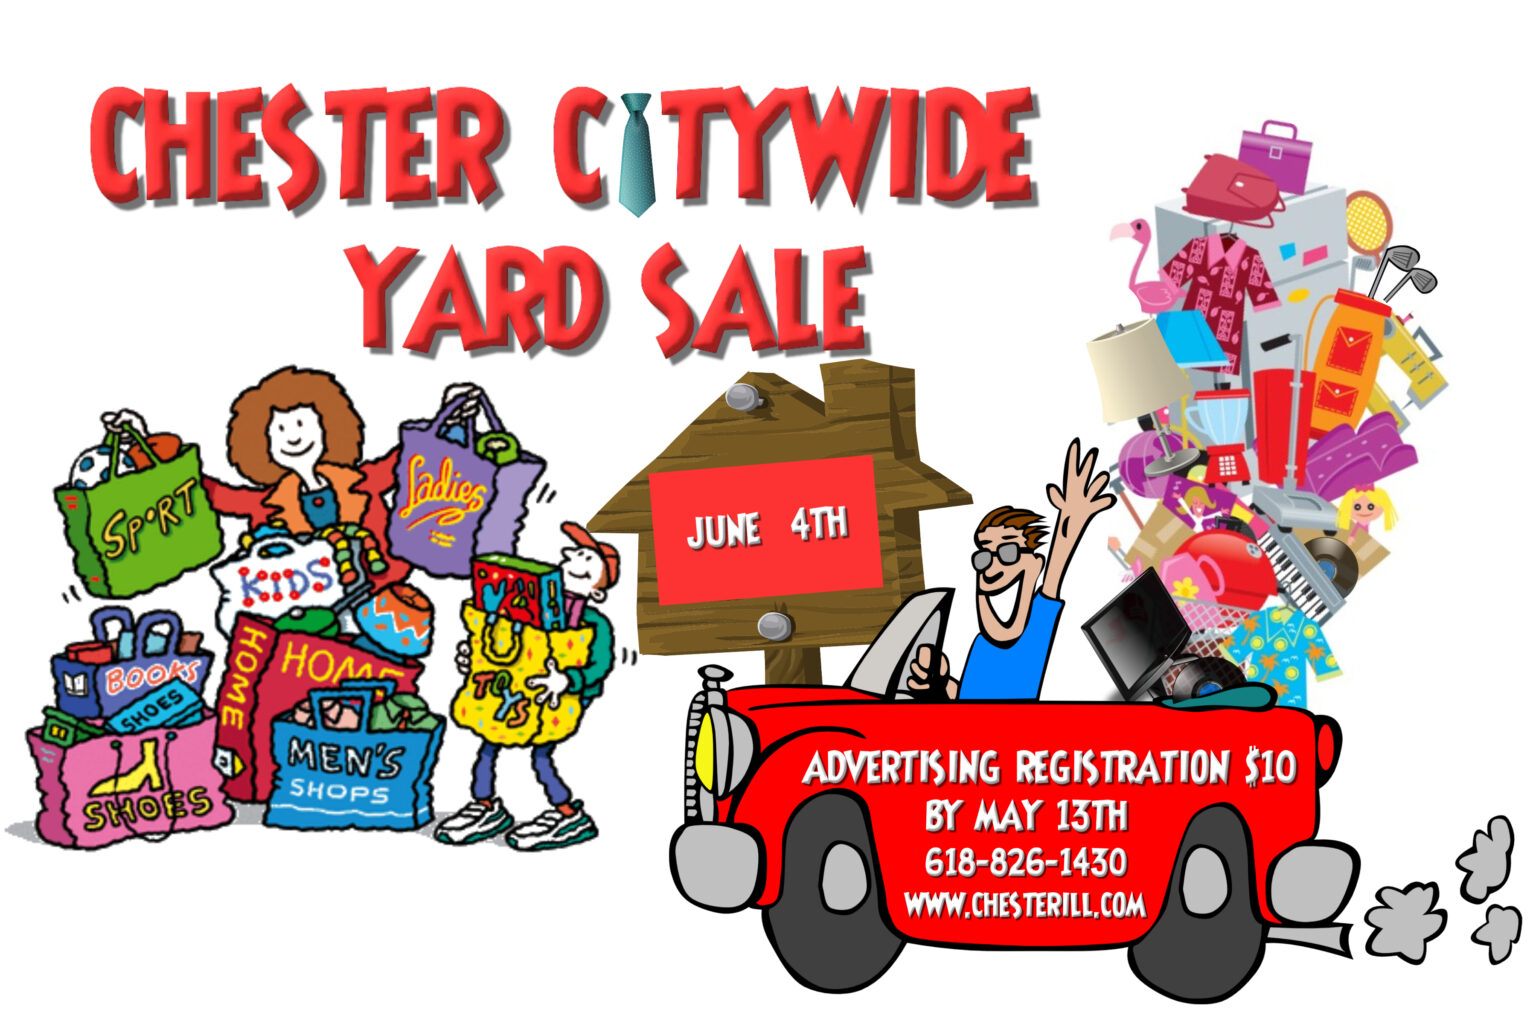 Citywide Yard Sale Chester, Illinois